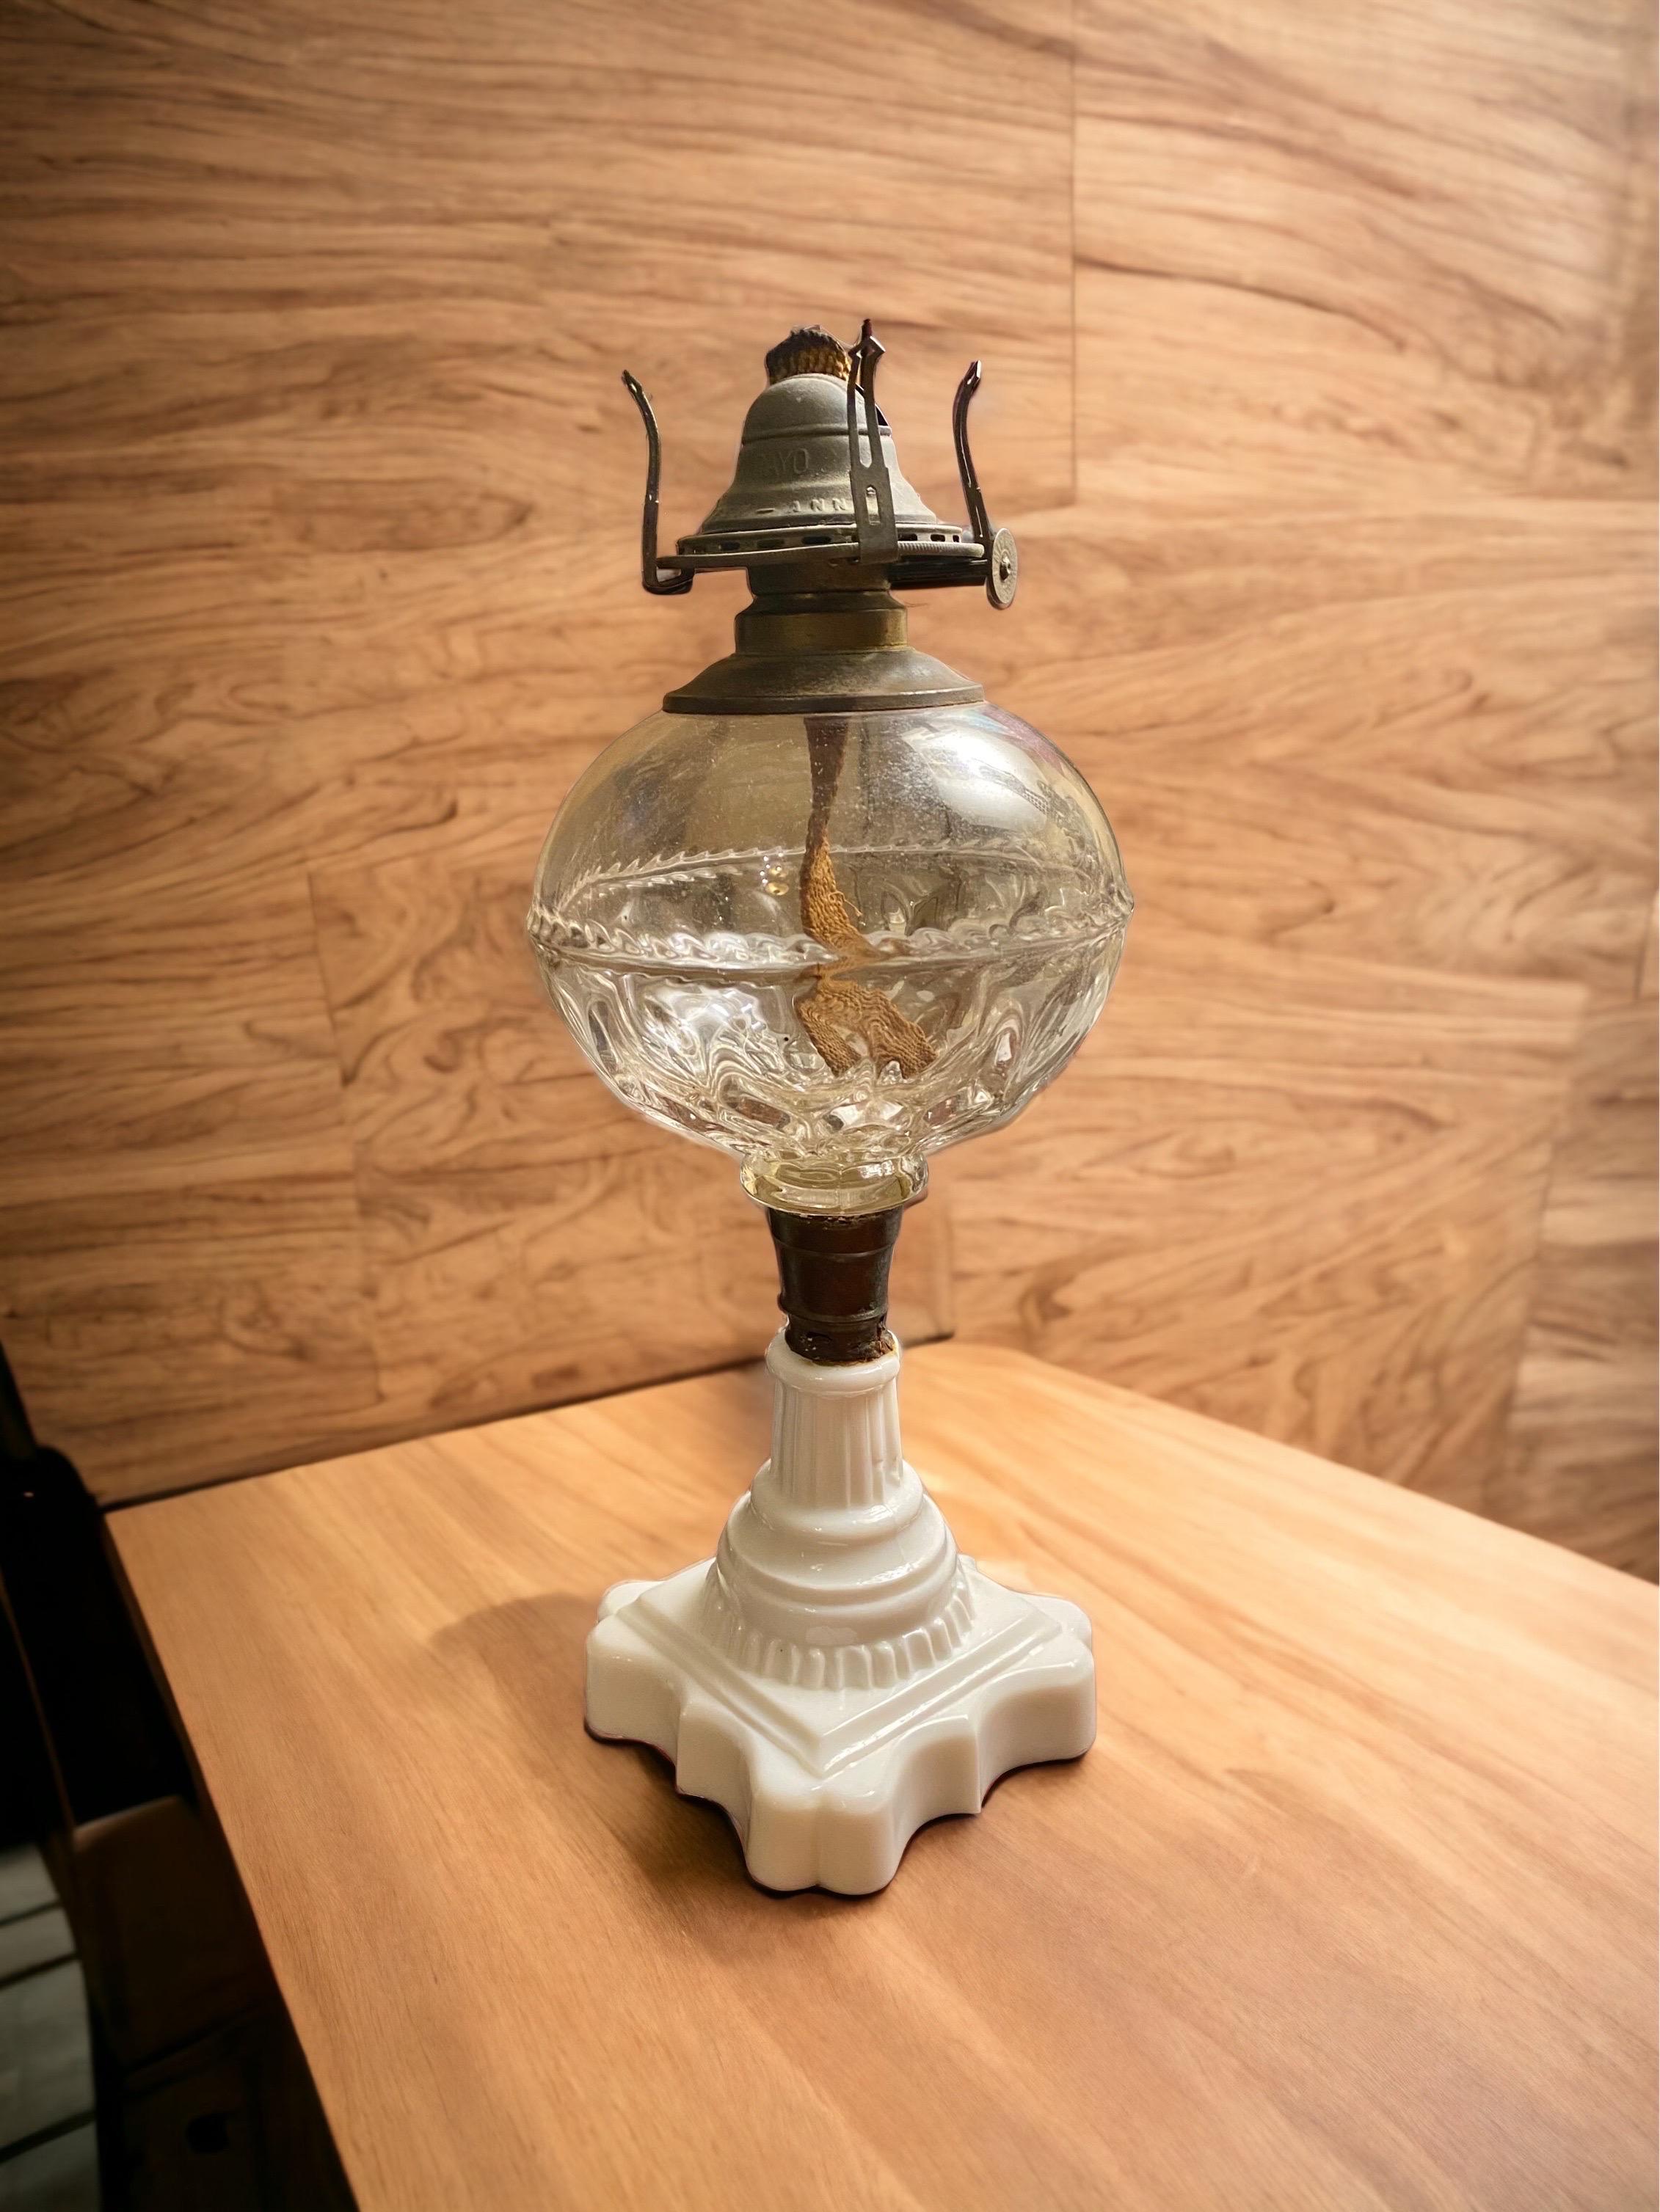 19th Century American whale oil lamp.
Colorless spherical EAPG glass font, high-lead opalescent white Milk Glass scalloped square base with tapered stem, brass connector,
No. 1 fine-line brass collar.
Fitted with a period Queen Anne burner and